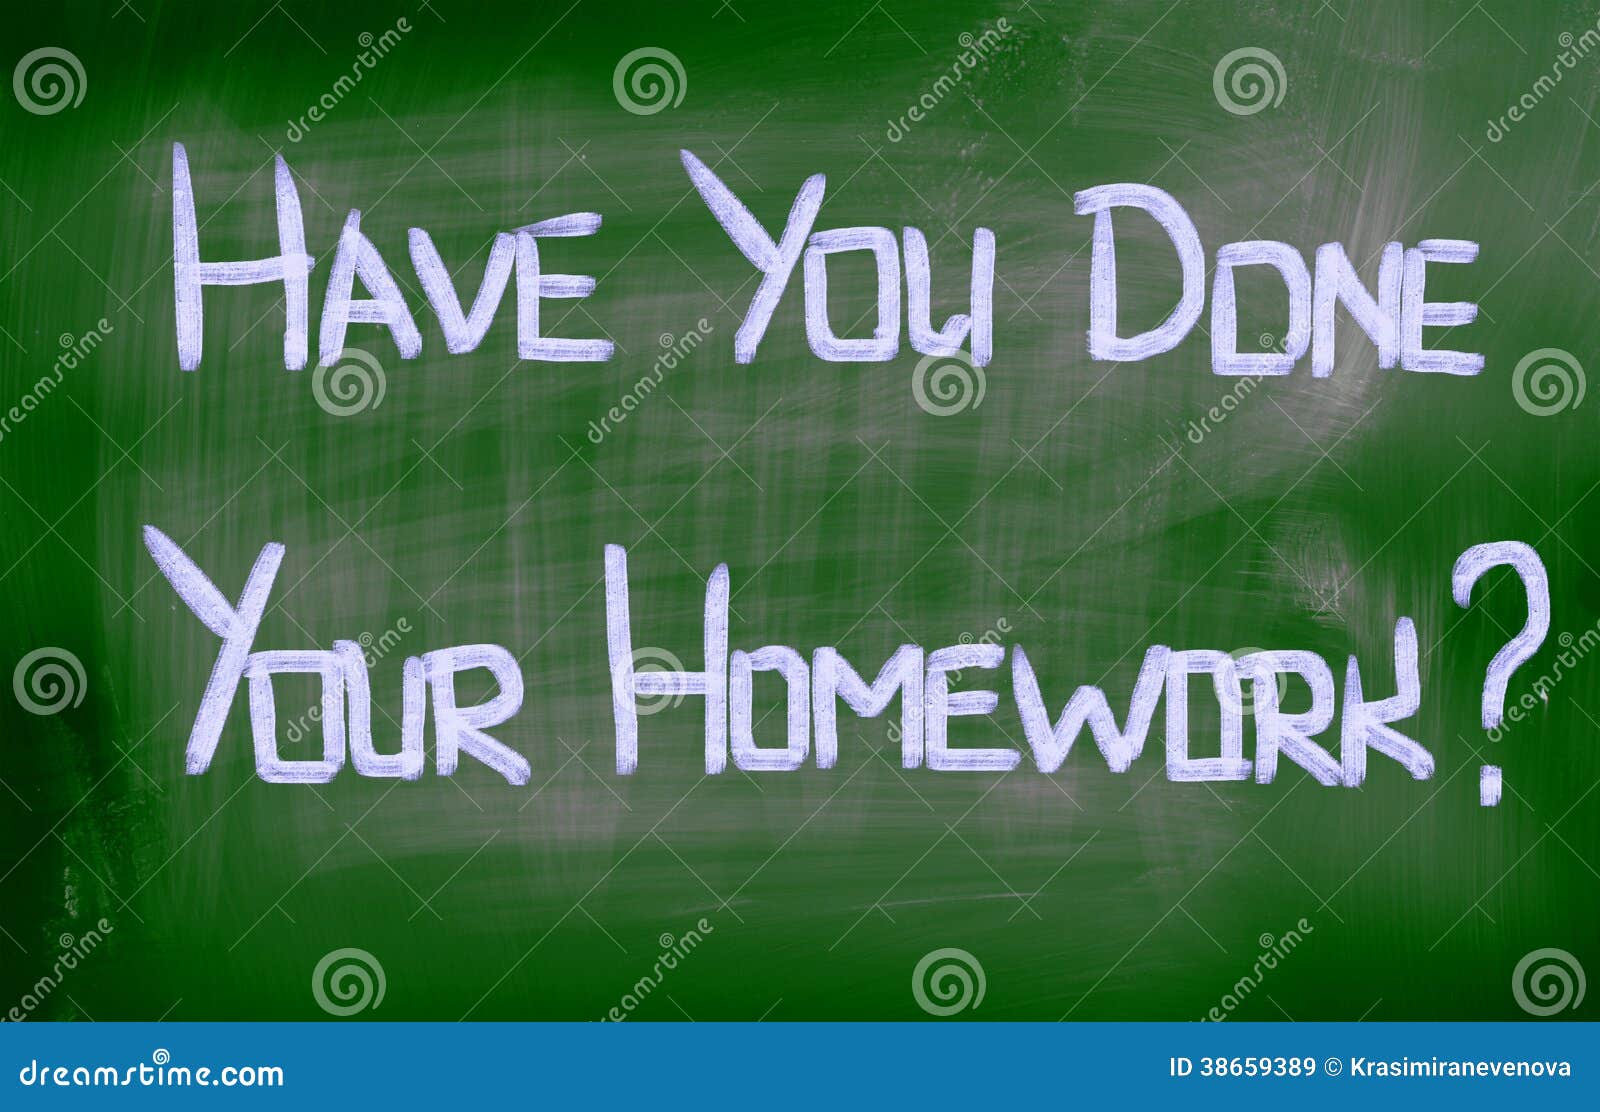 did you do your homework or have you done